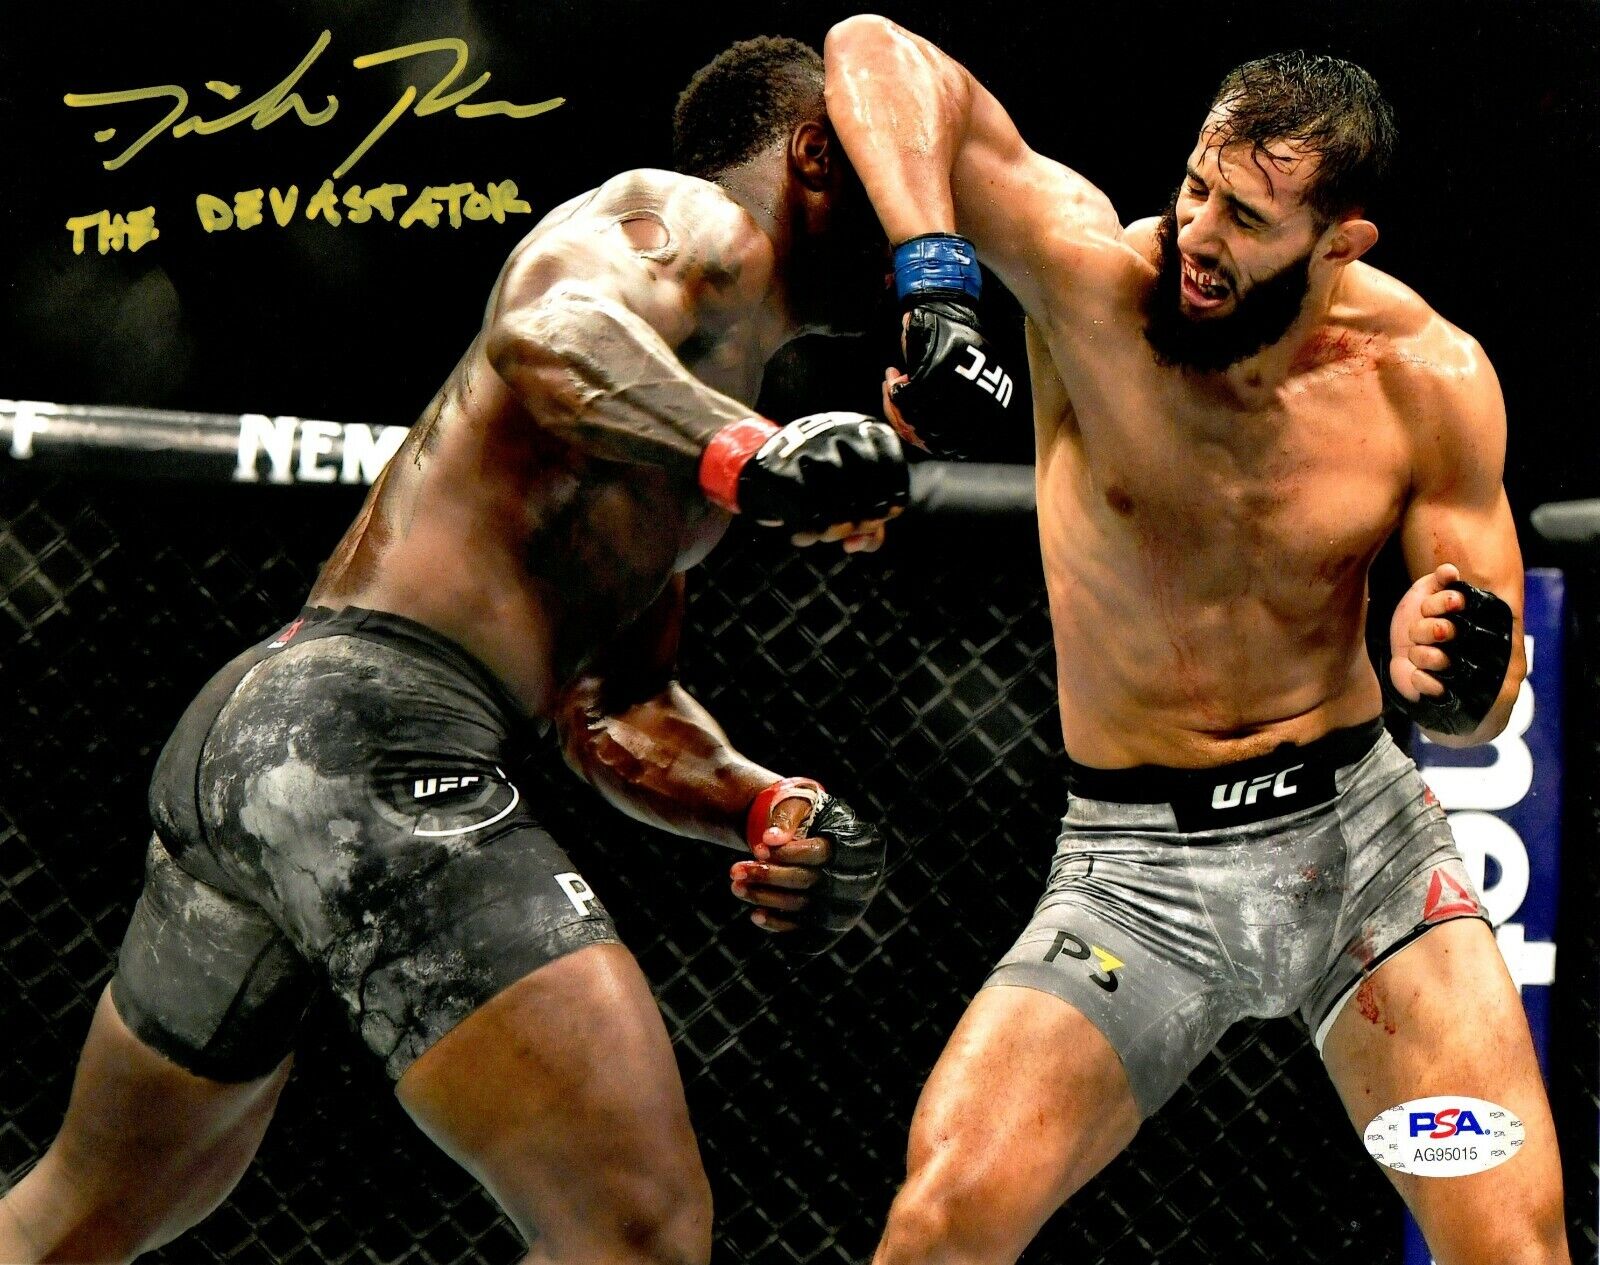 Dominick Reyes autographed signed inscribed 8x10 Photo Poster painting UFC The Devastator PSA